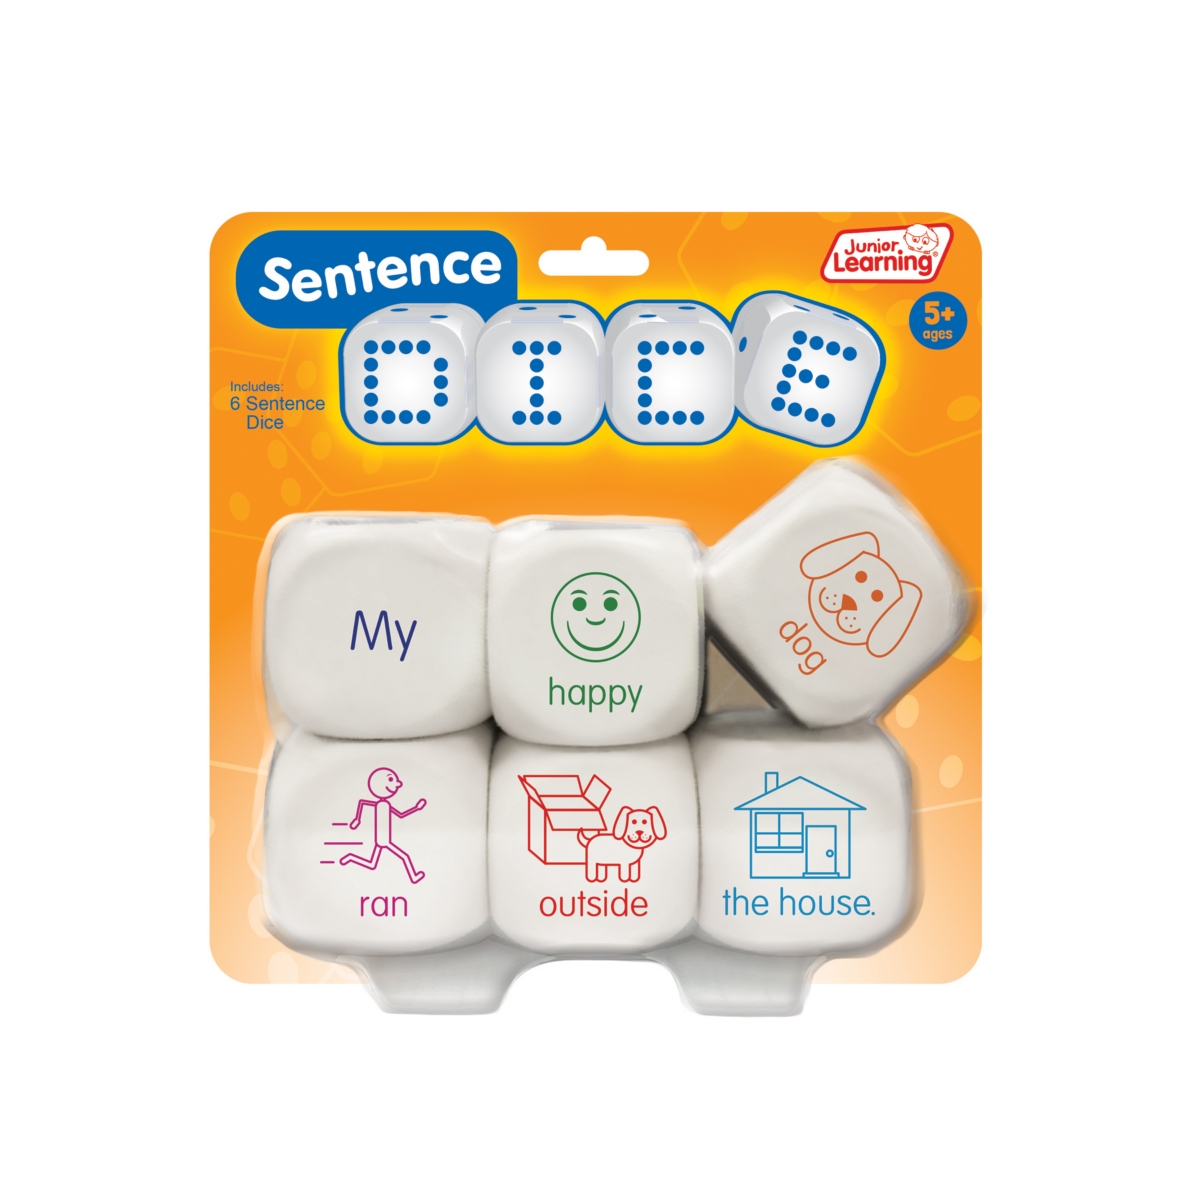 Junior Learning Kids' Sentence Dice Educational Learning Game In Multi